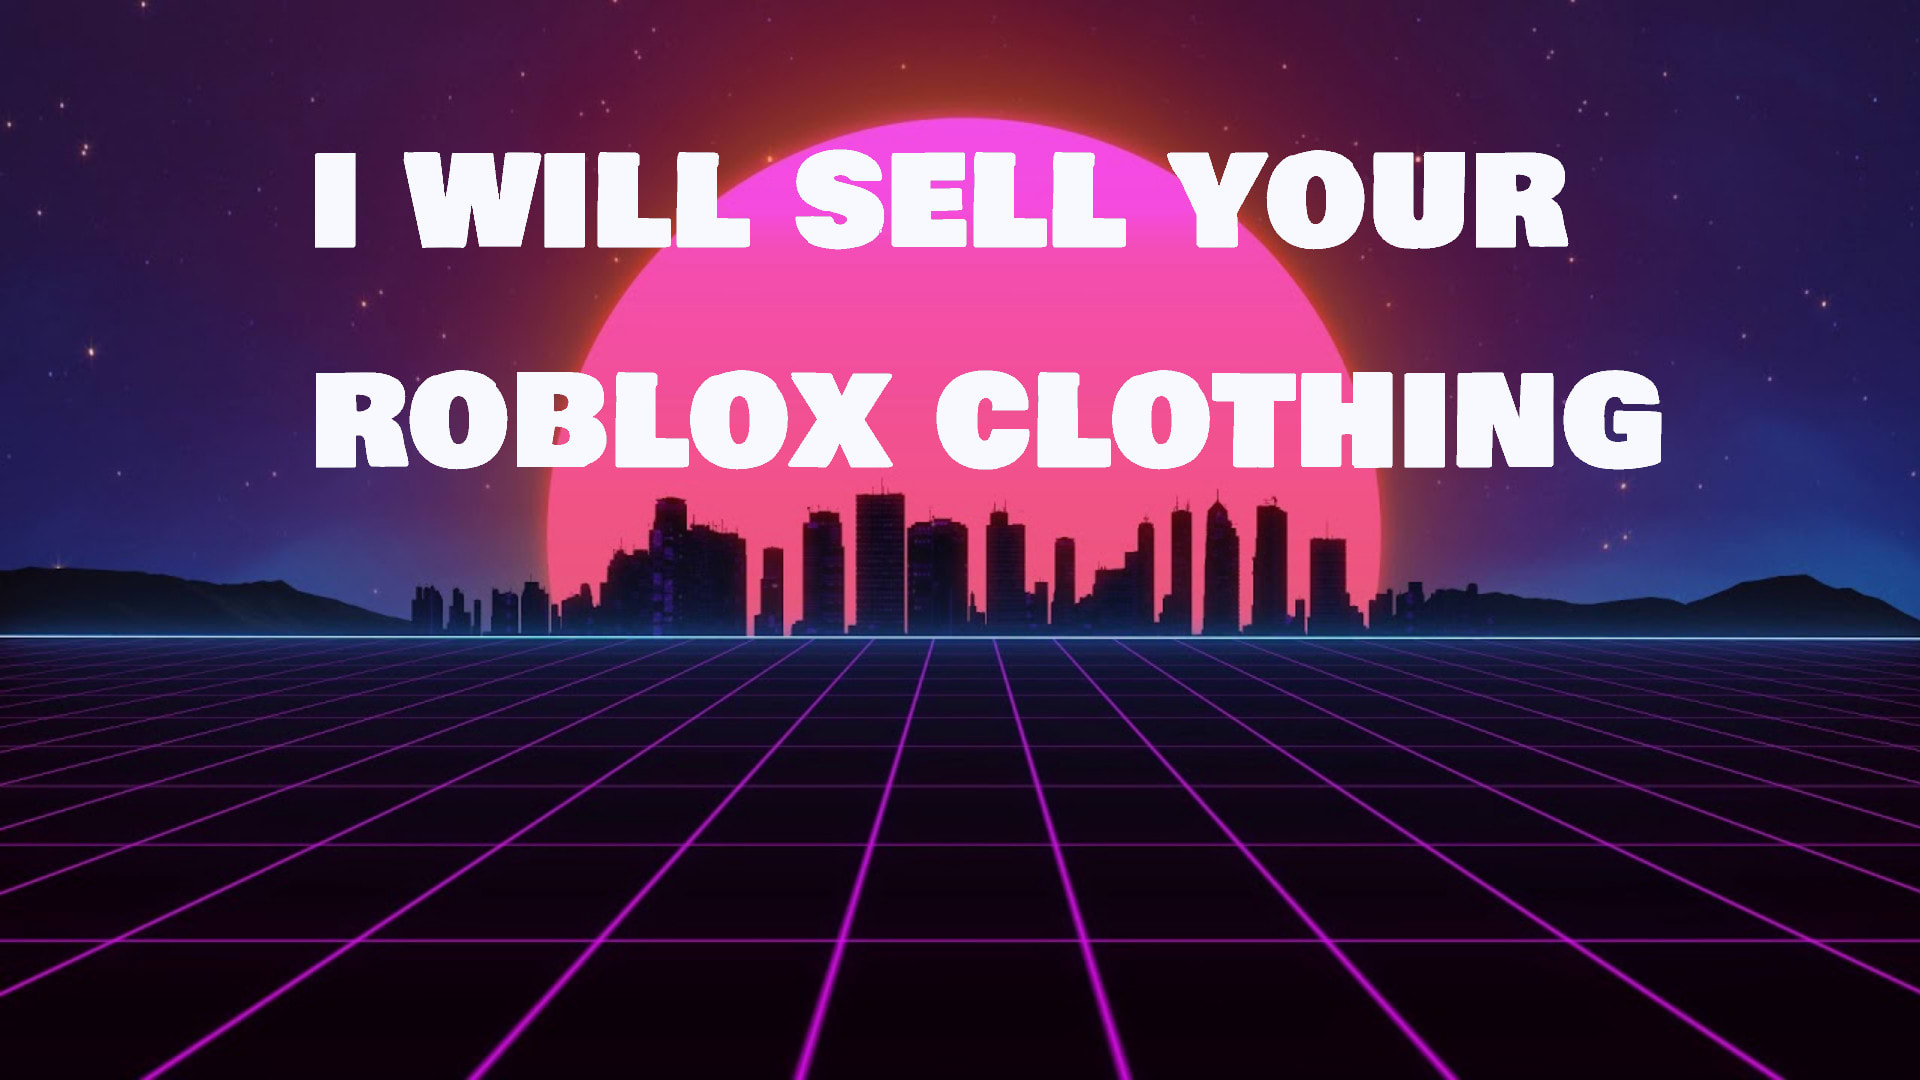 Sell Your Roblox Clothing To My Group With 5k Members And Pay The Profit Earned By Trirex